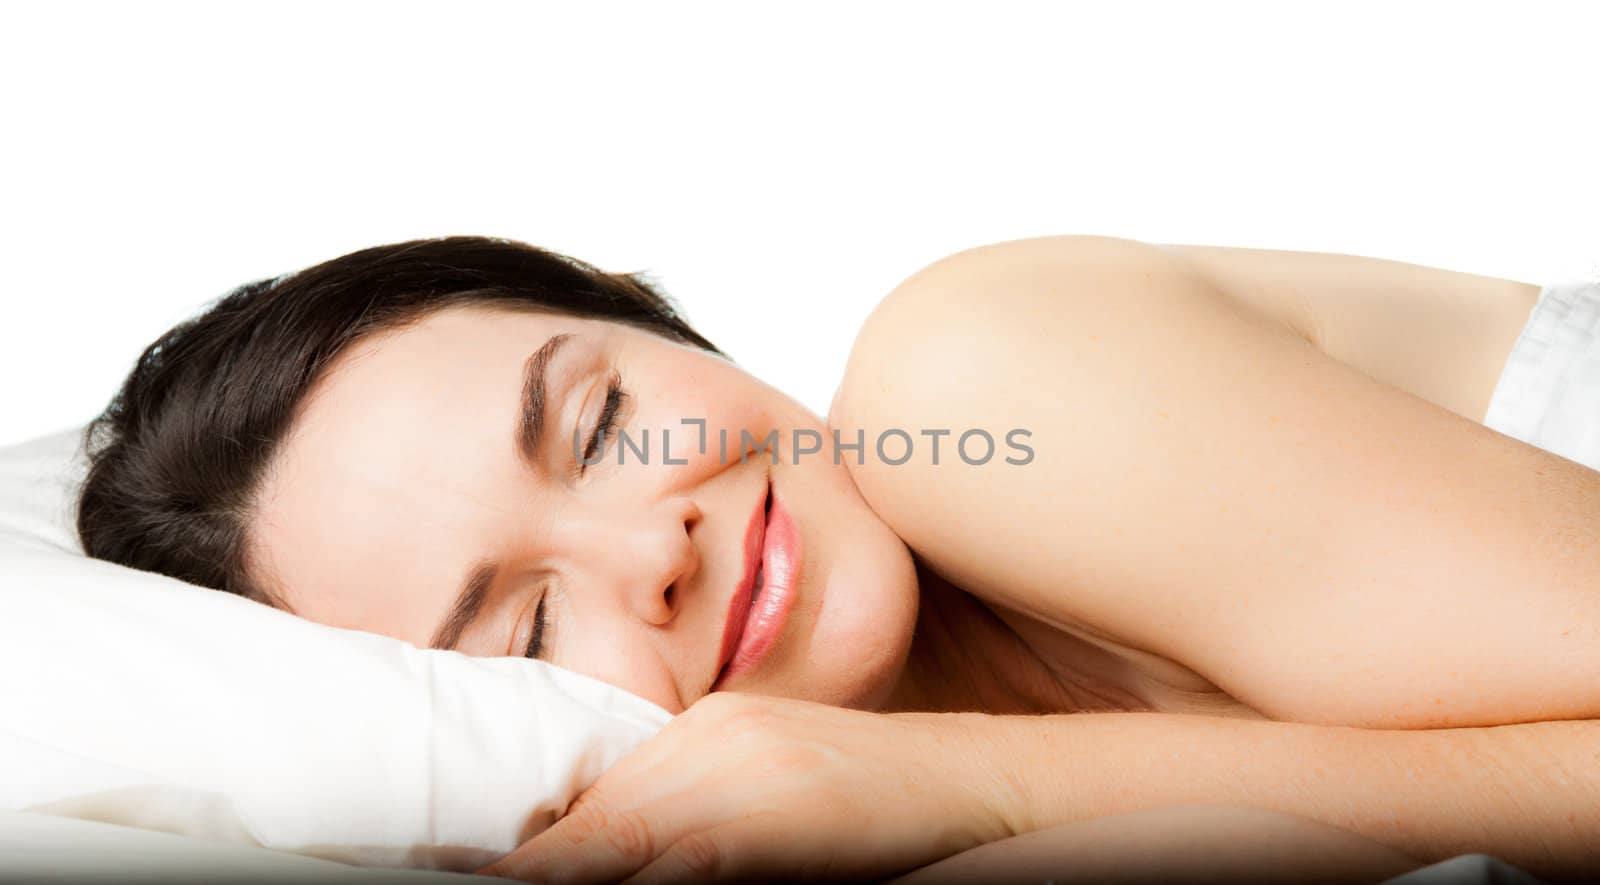 A beautiful young woman sleeping peacefully. Isolated over white.